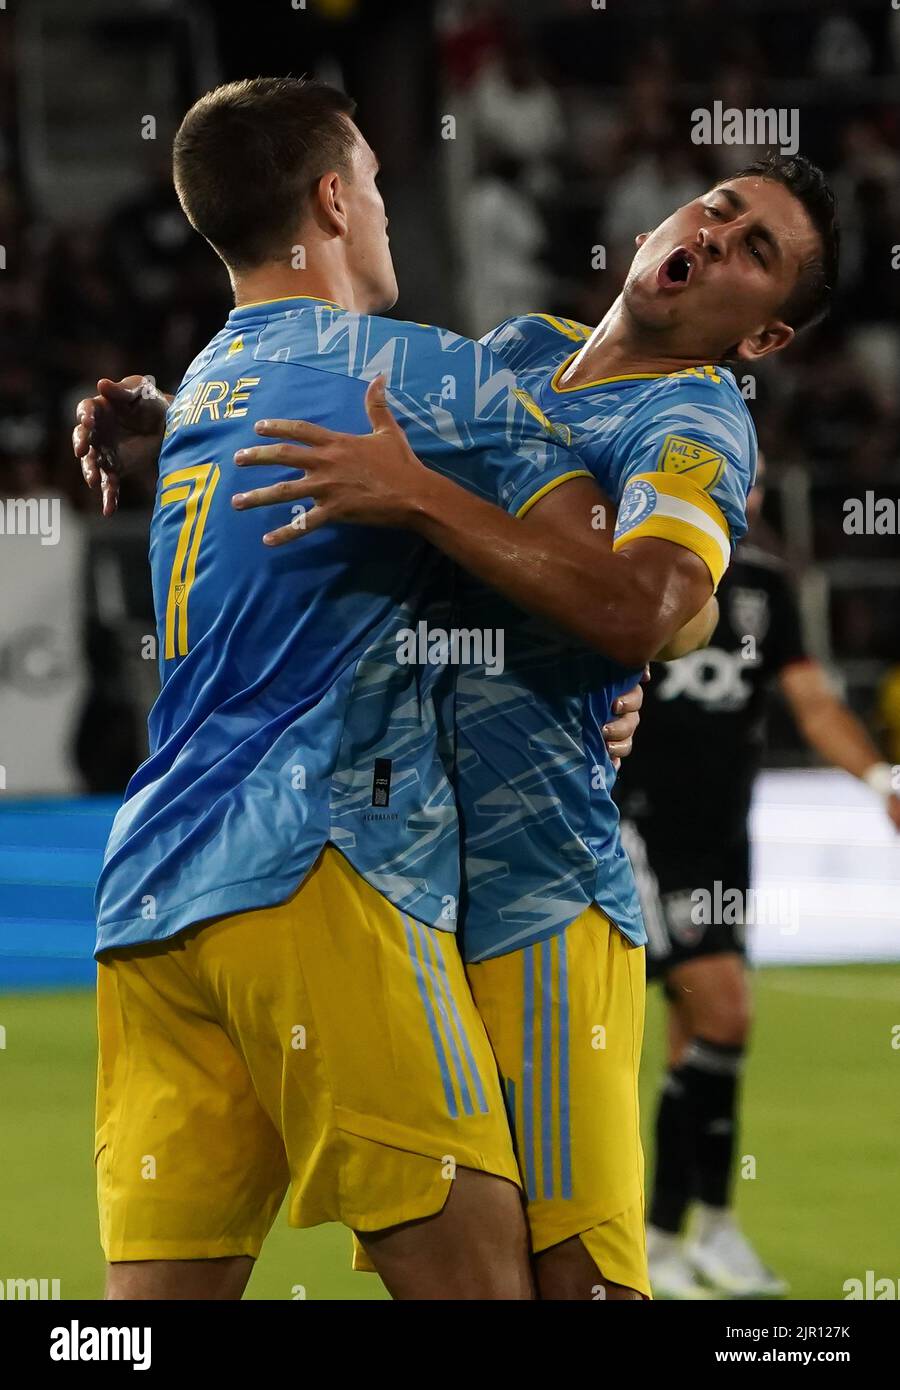 WASHINGTON, DC, USA - 20 AUGUST 2022: Philadelphia Union forward Mikael Uhre (7) after scoring the first goal during a MLS match between D.C United and the Philadelphia Union on August 20, 2022, at Audi Field, in Washington, DC. (Photo by Tony Quinn-Alamy Live News) Stock Photo